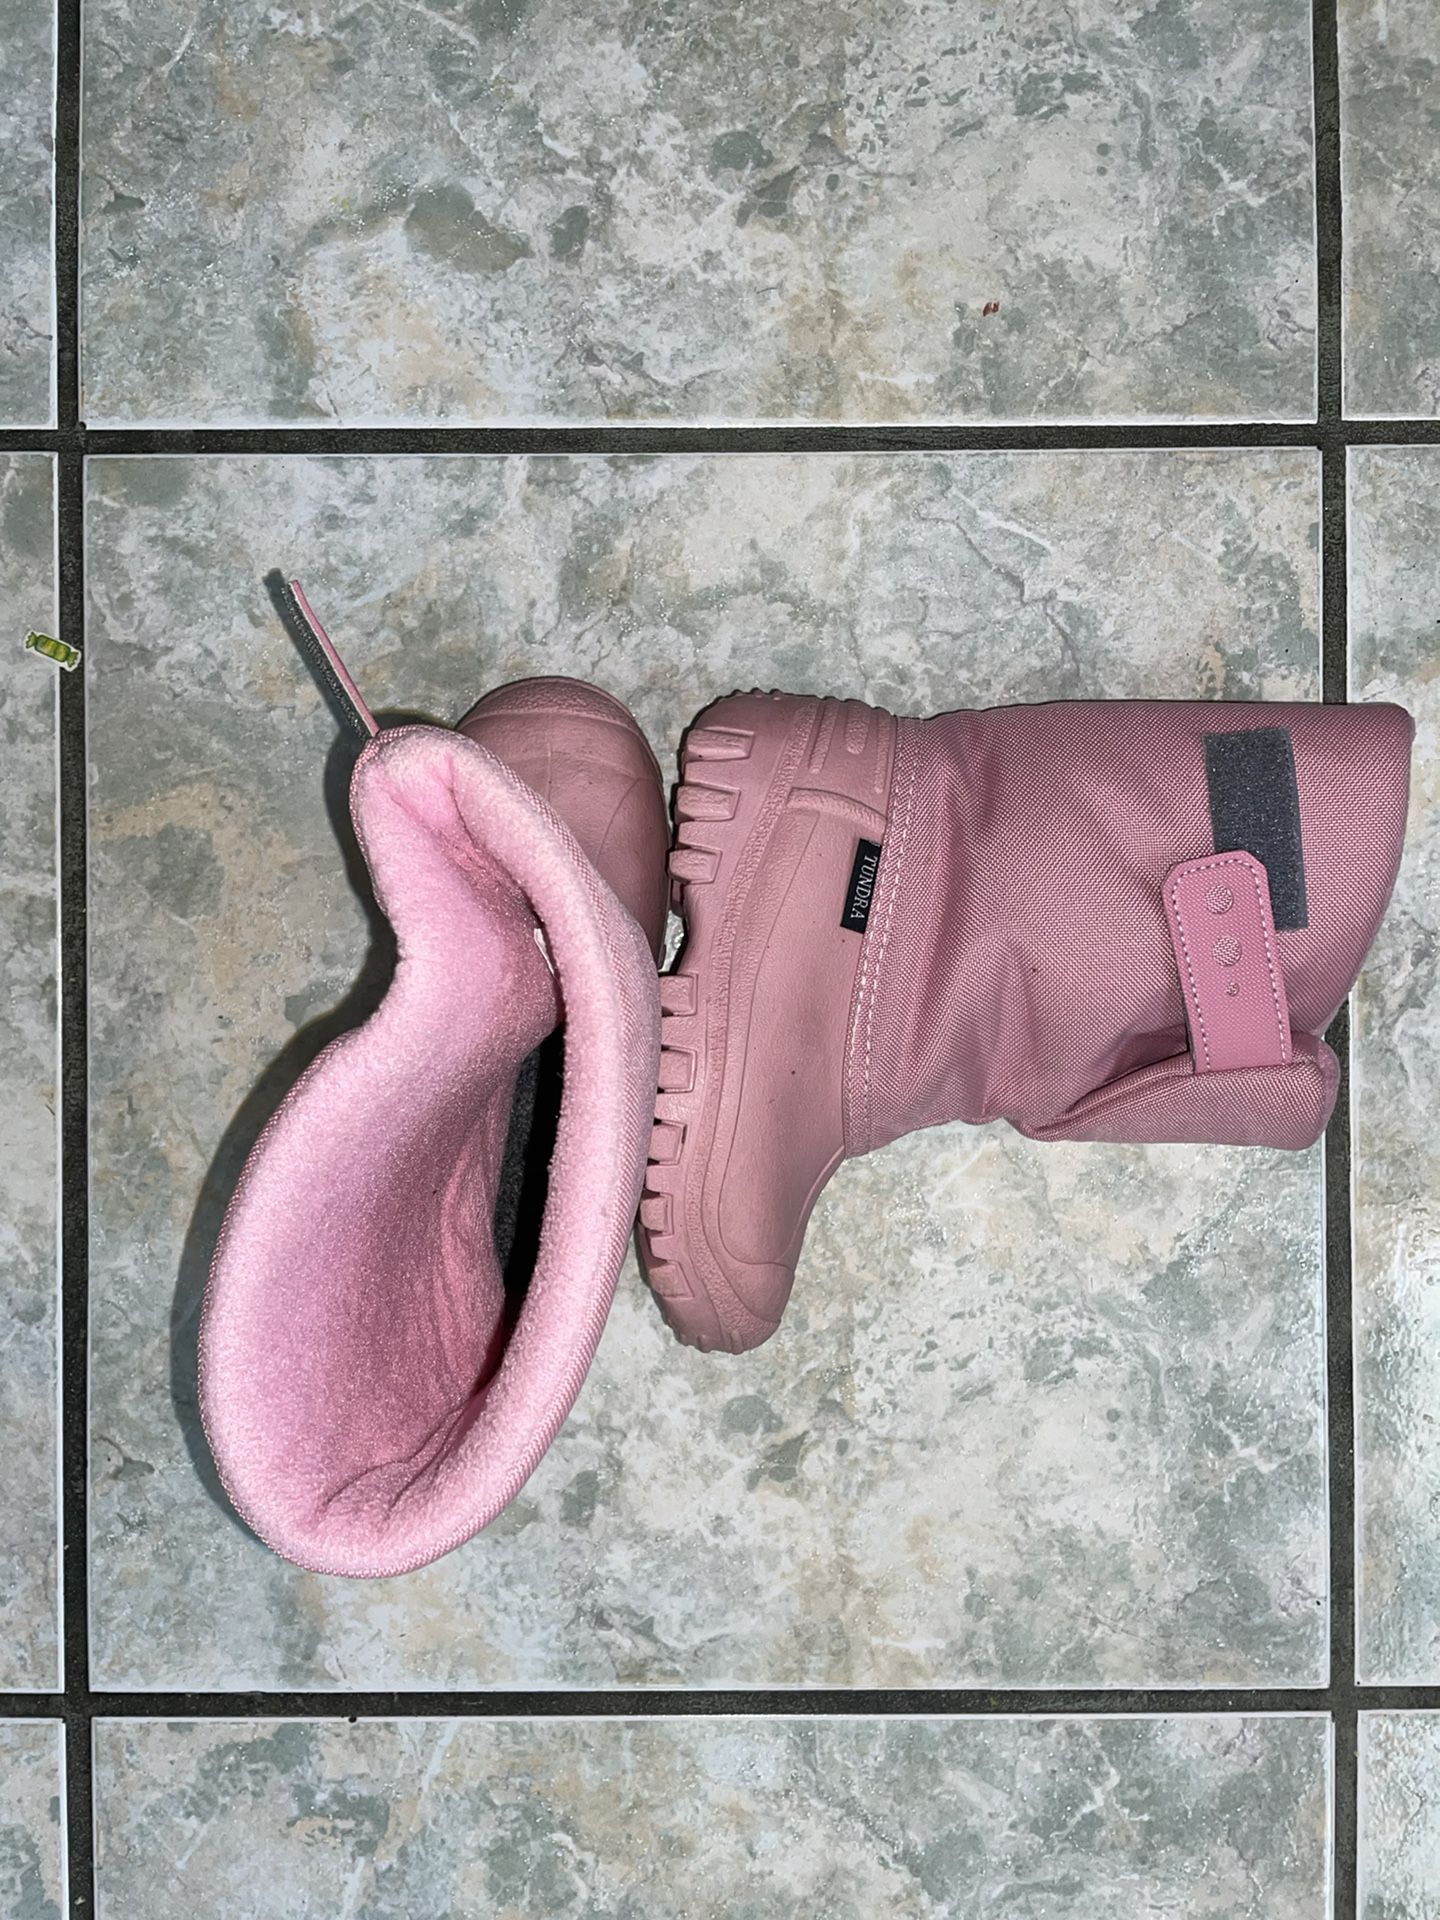 Girl’s pink snow boots, size 10